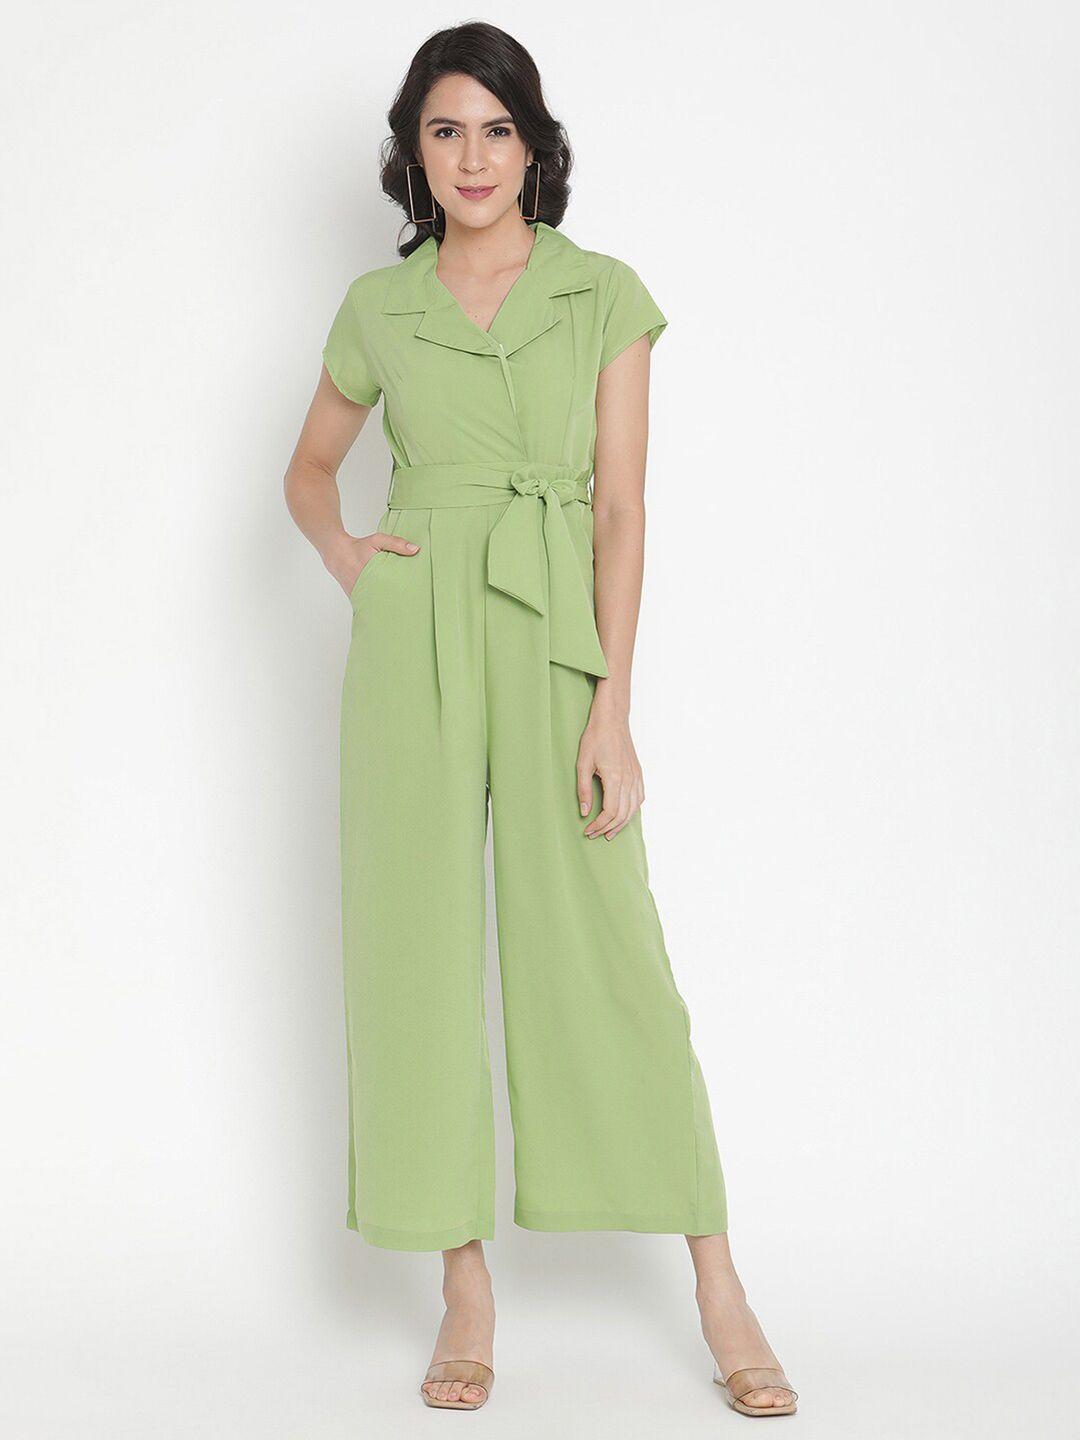 thread muster lime green basic jumpsuit